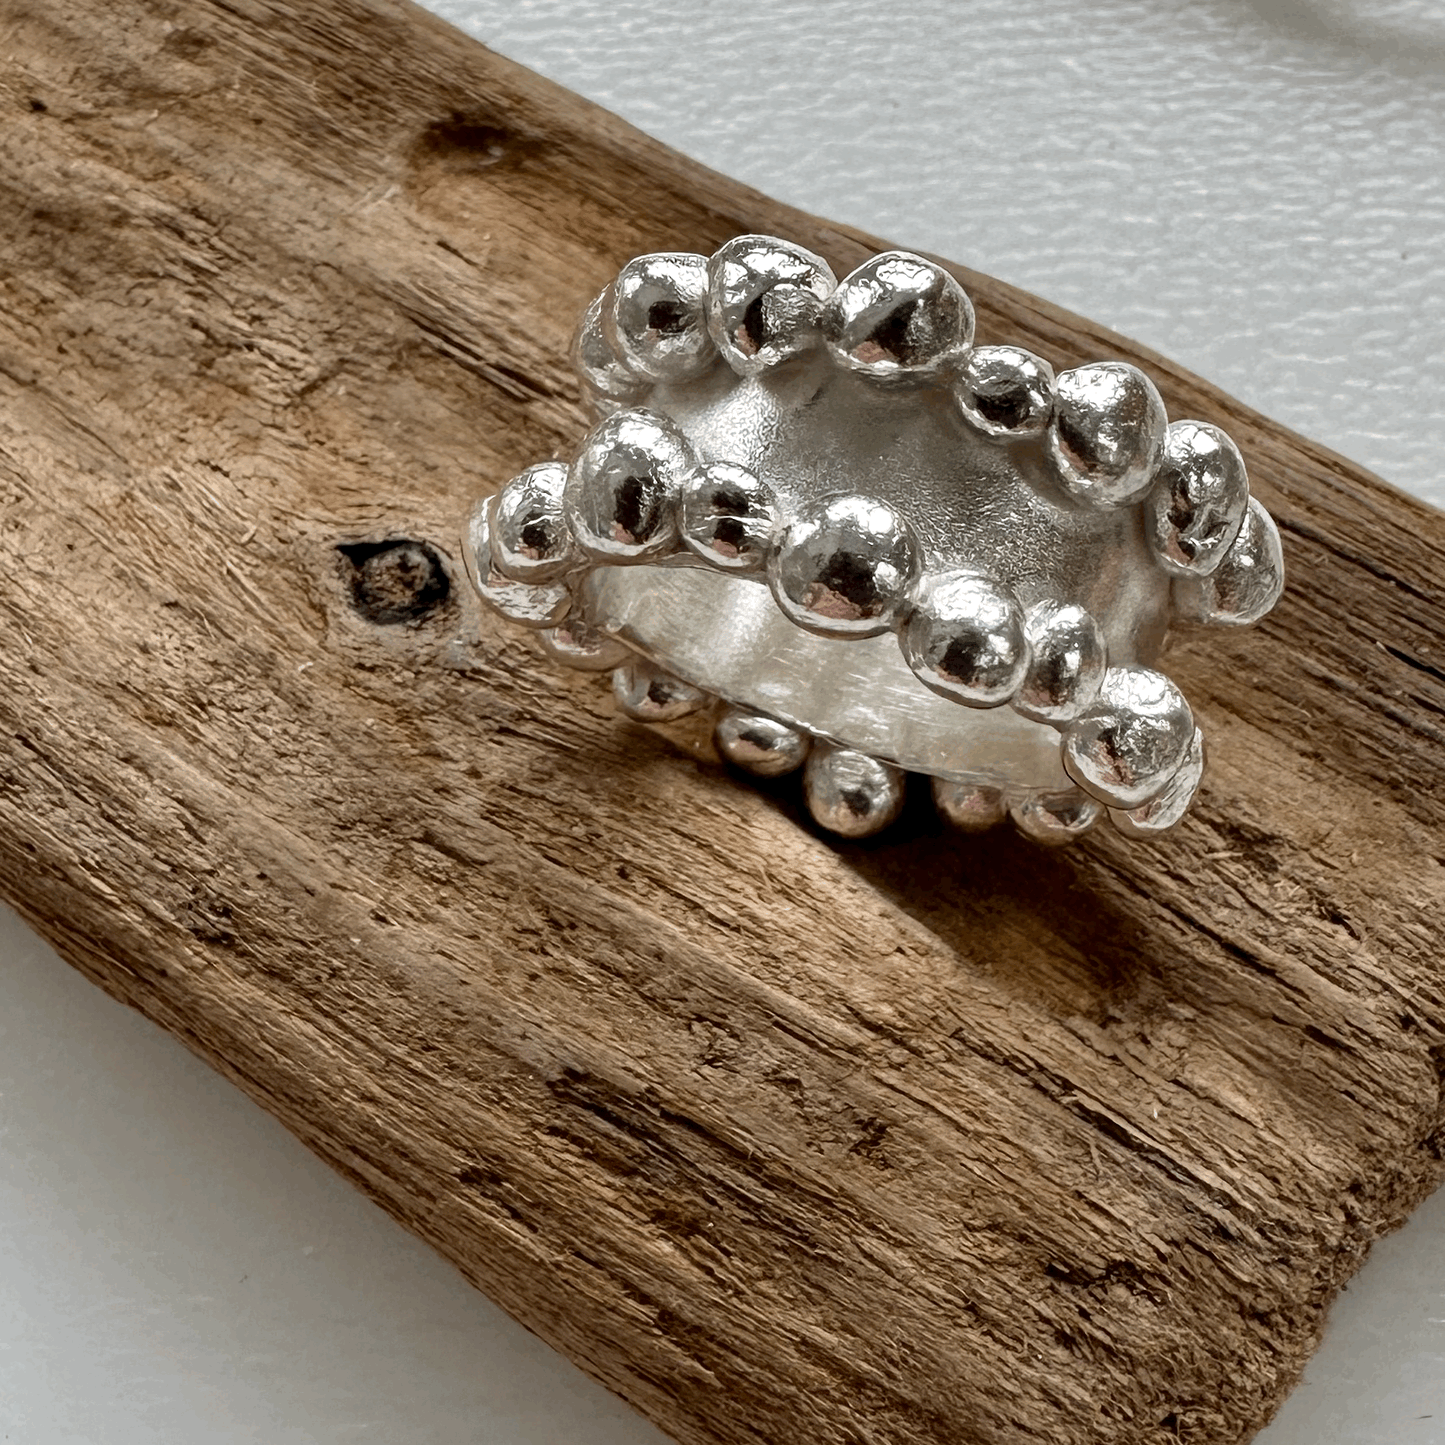 Kelp Rings: hand carved in wax and cast in silver, inspired by the wonderful bobbled kelp seaweed.